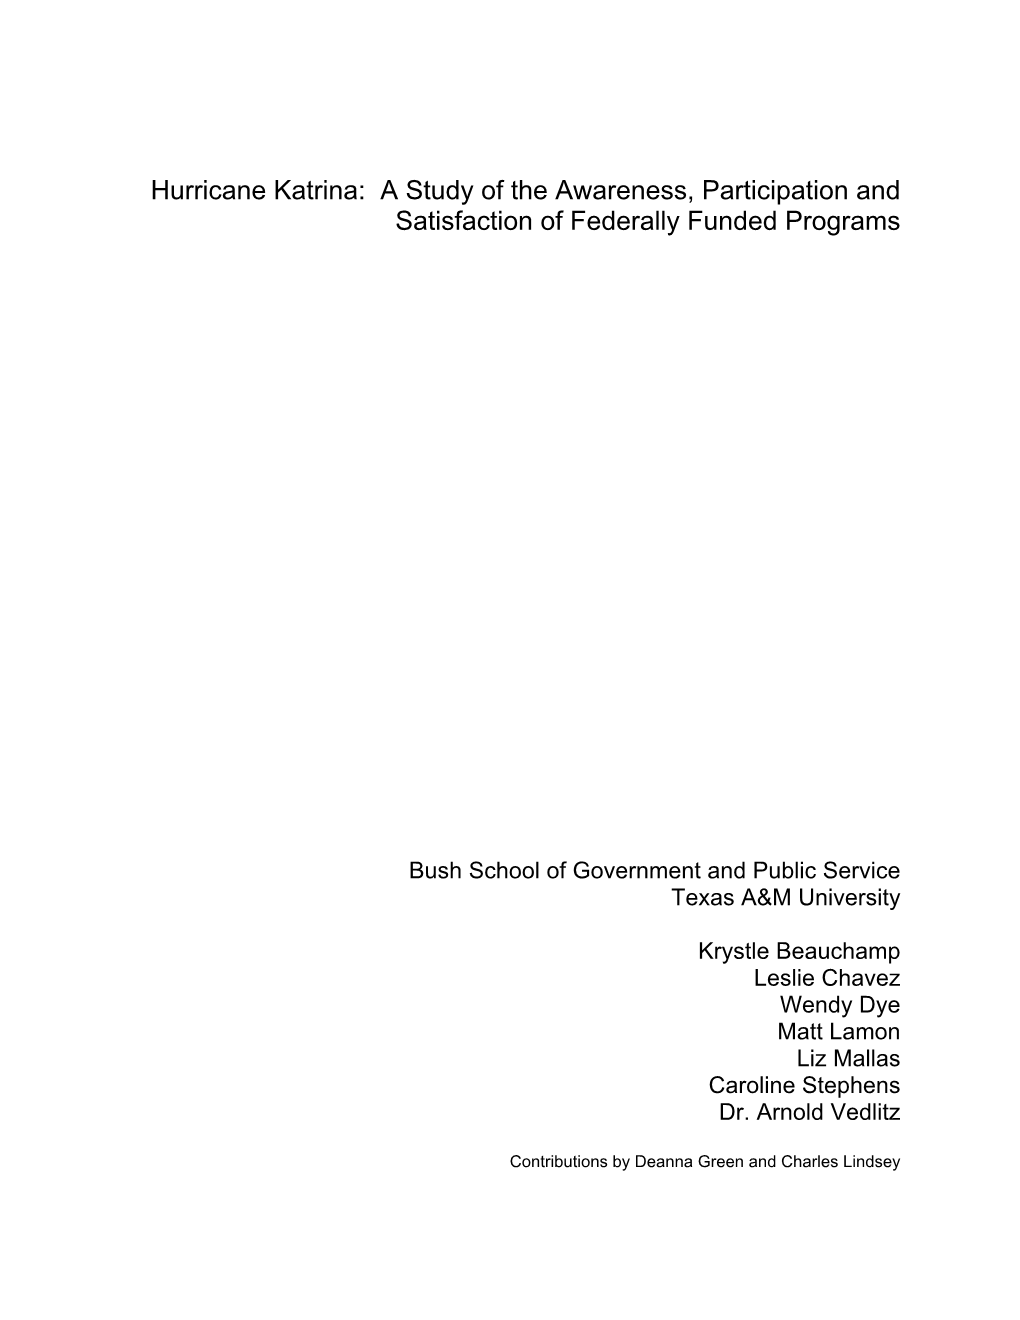 Hurricane Katrina: a Study of the Awareness, Participation and Satisfaction of Federally Funded Programs